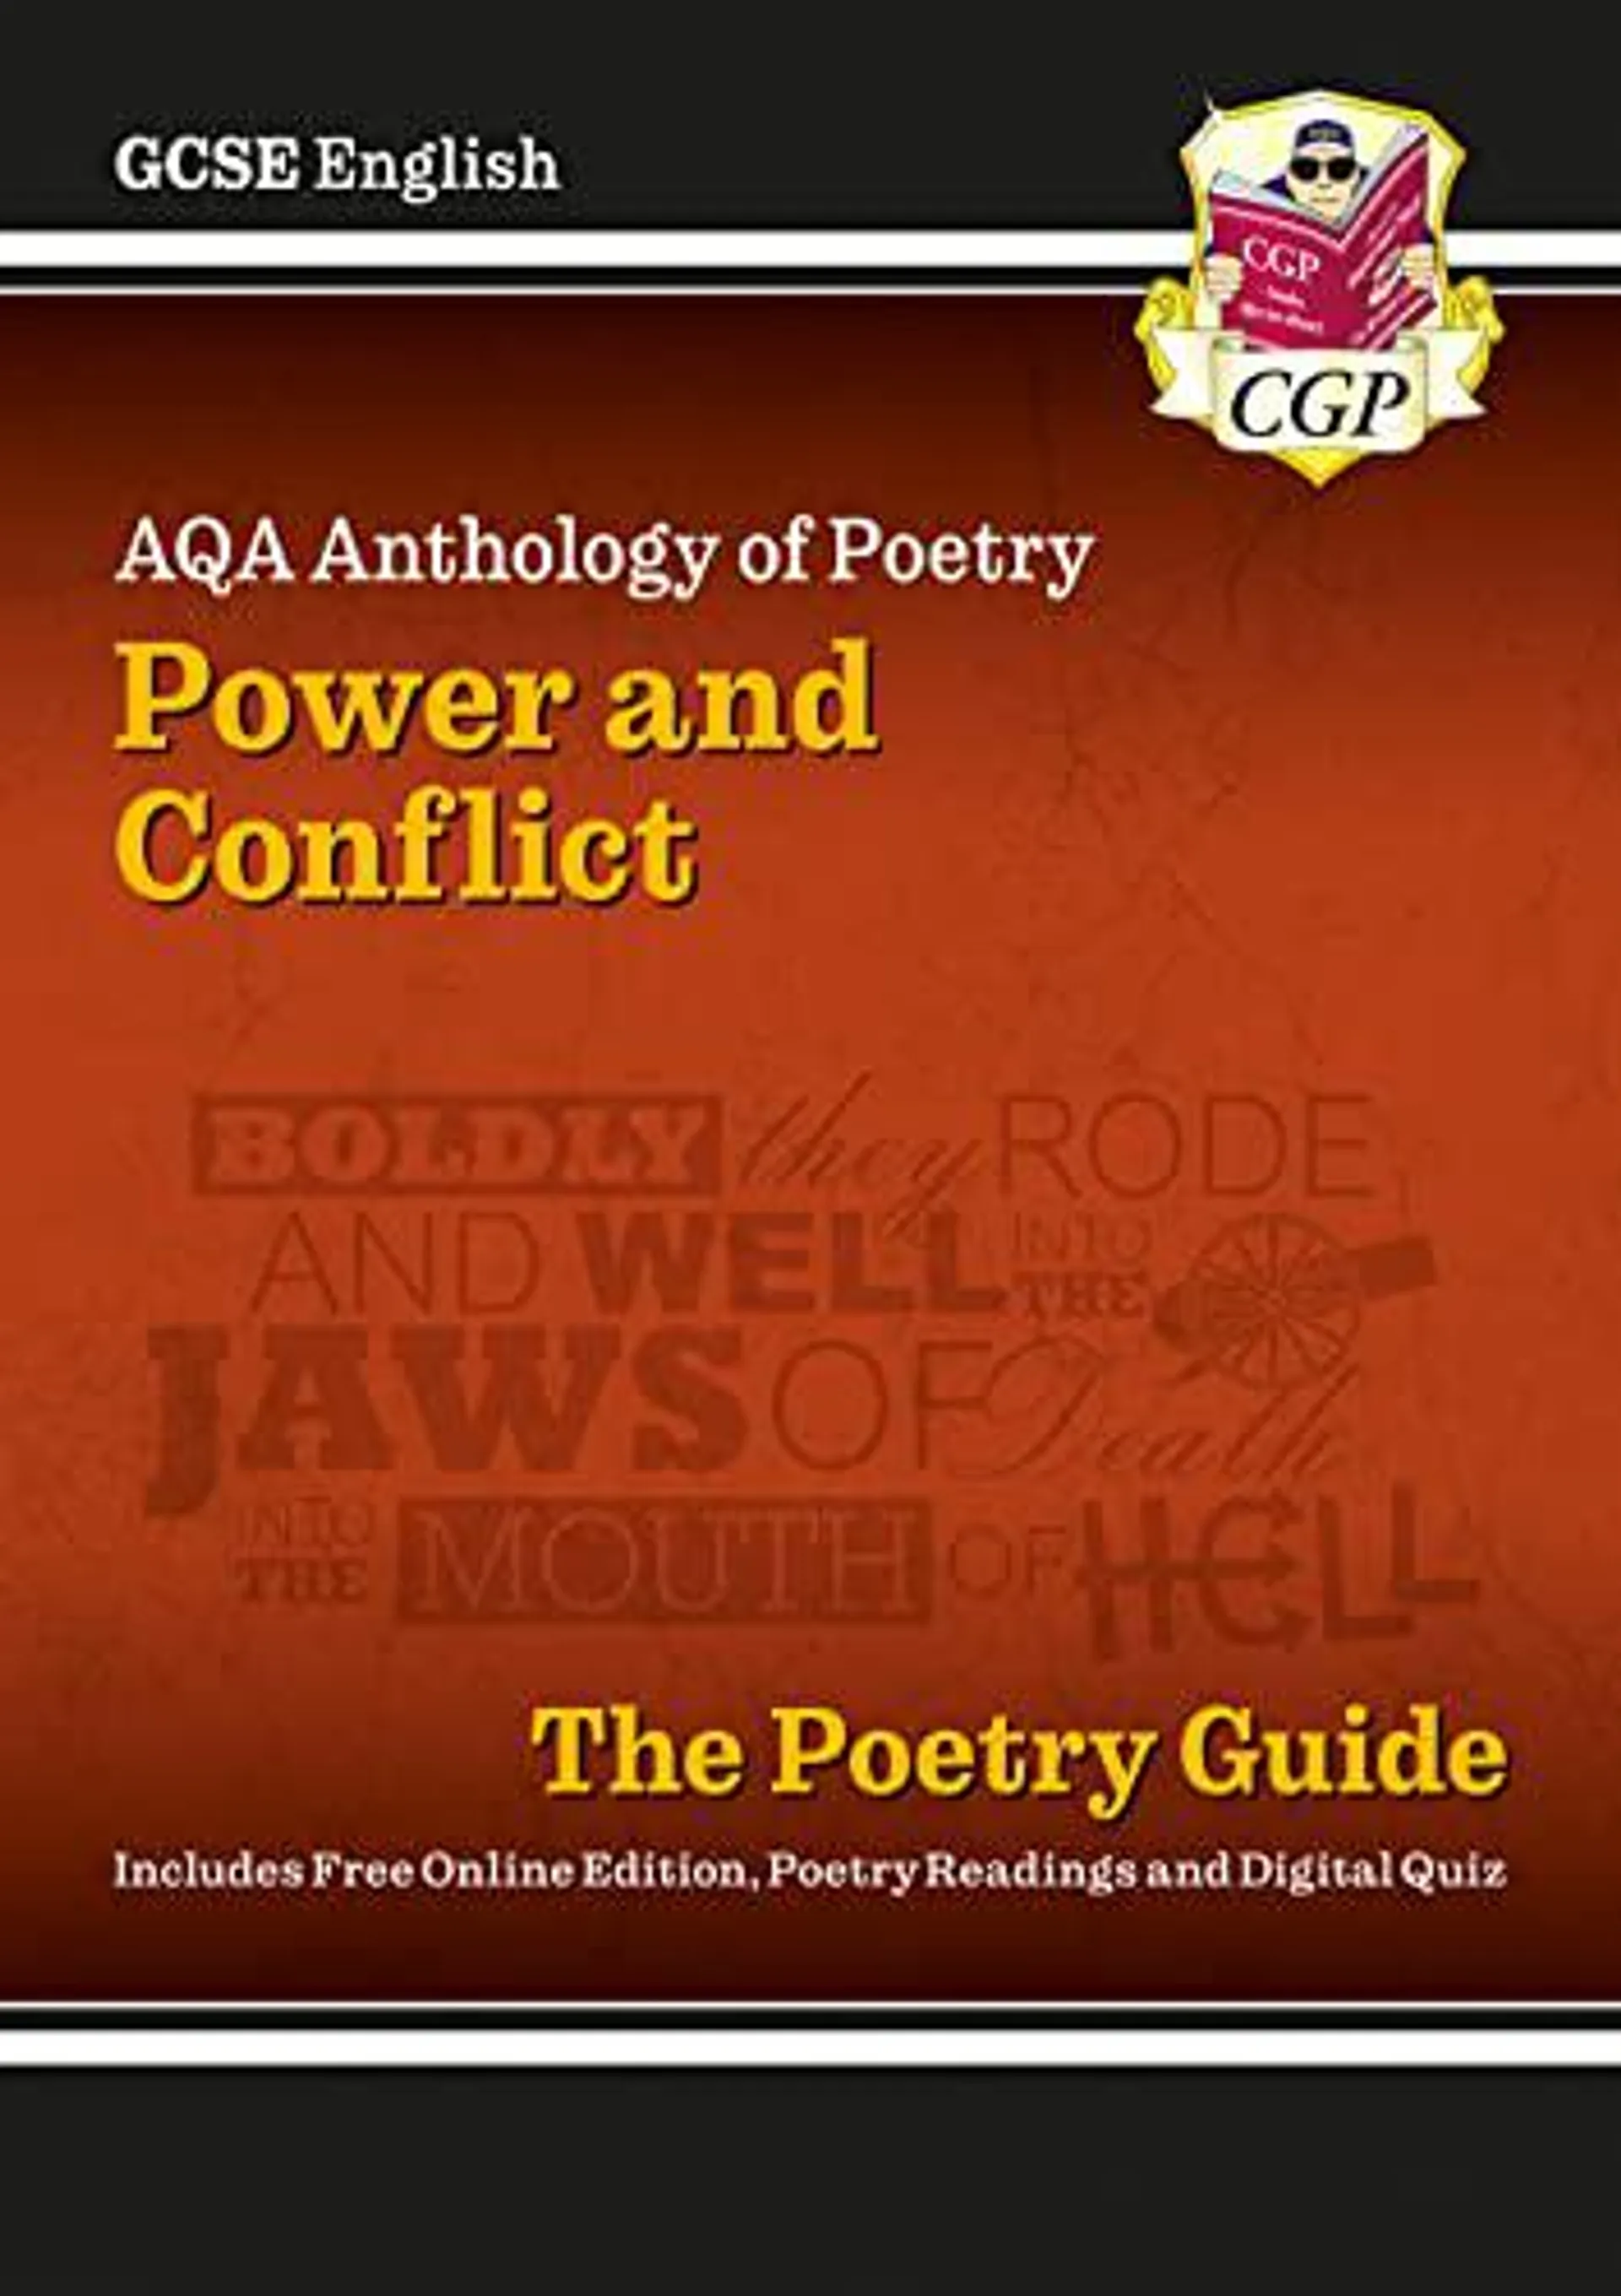 New GCSE English Literature AQA Poetry Guide: Power & Conflict Anthology - For the Grade 9-1 Course